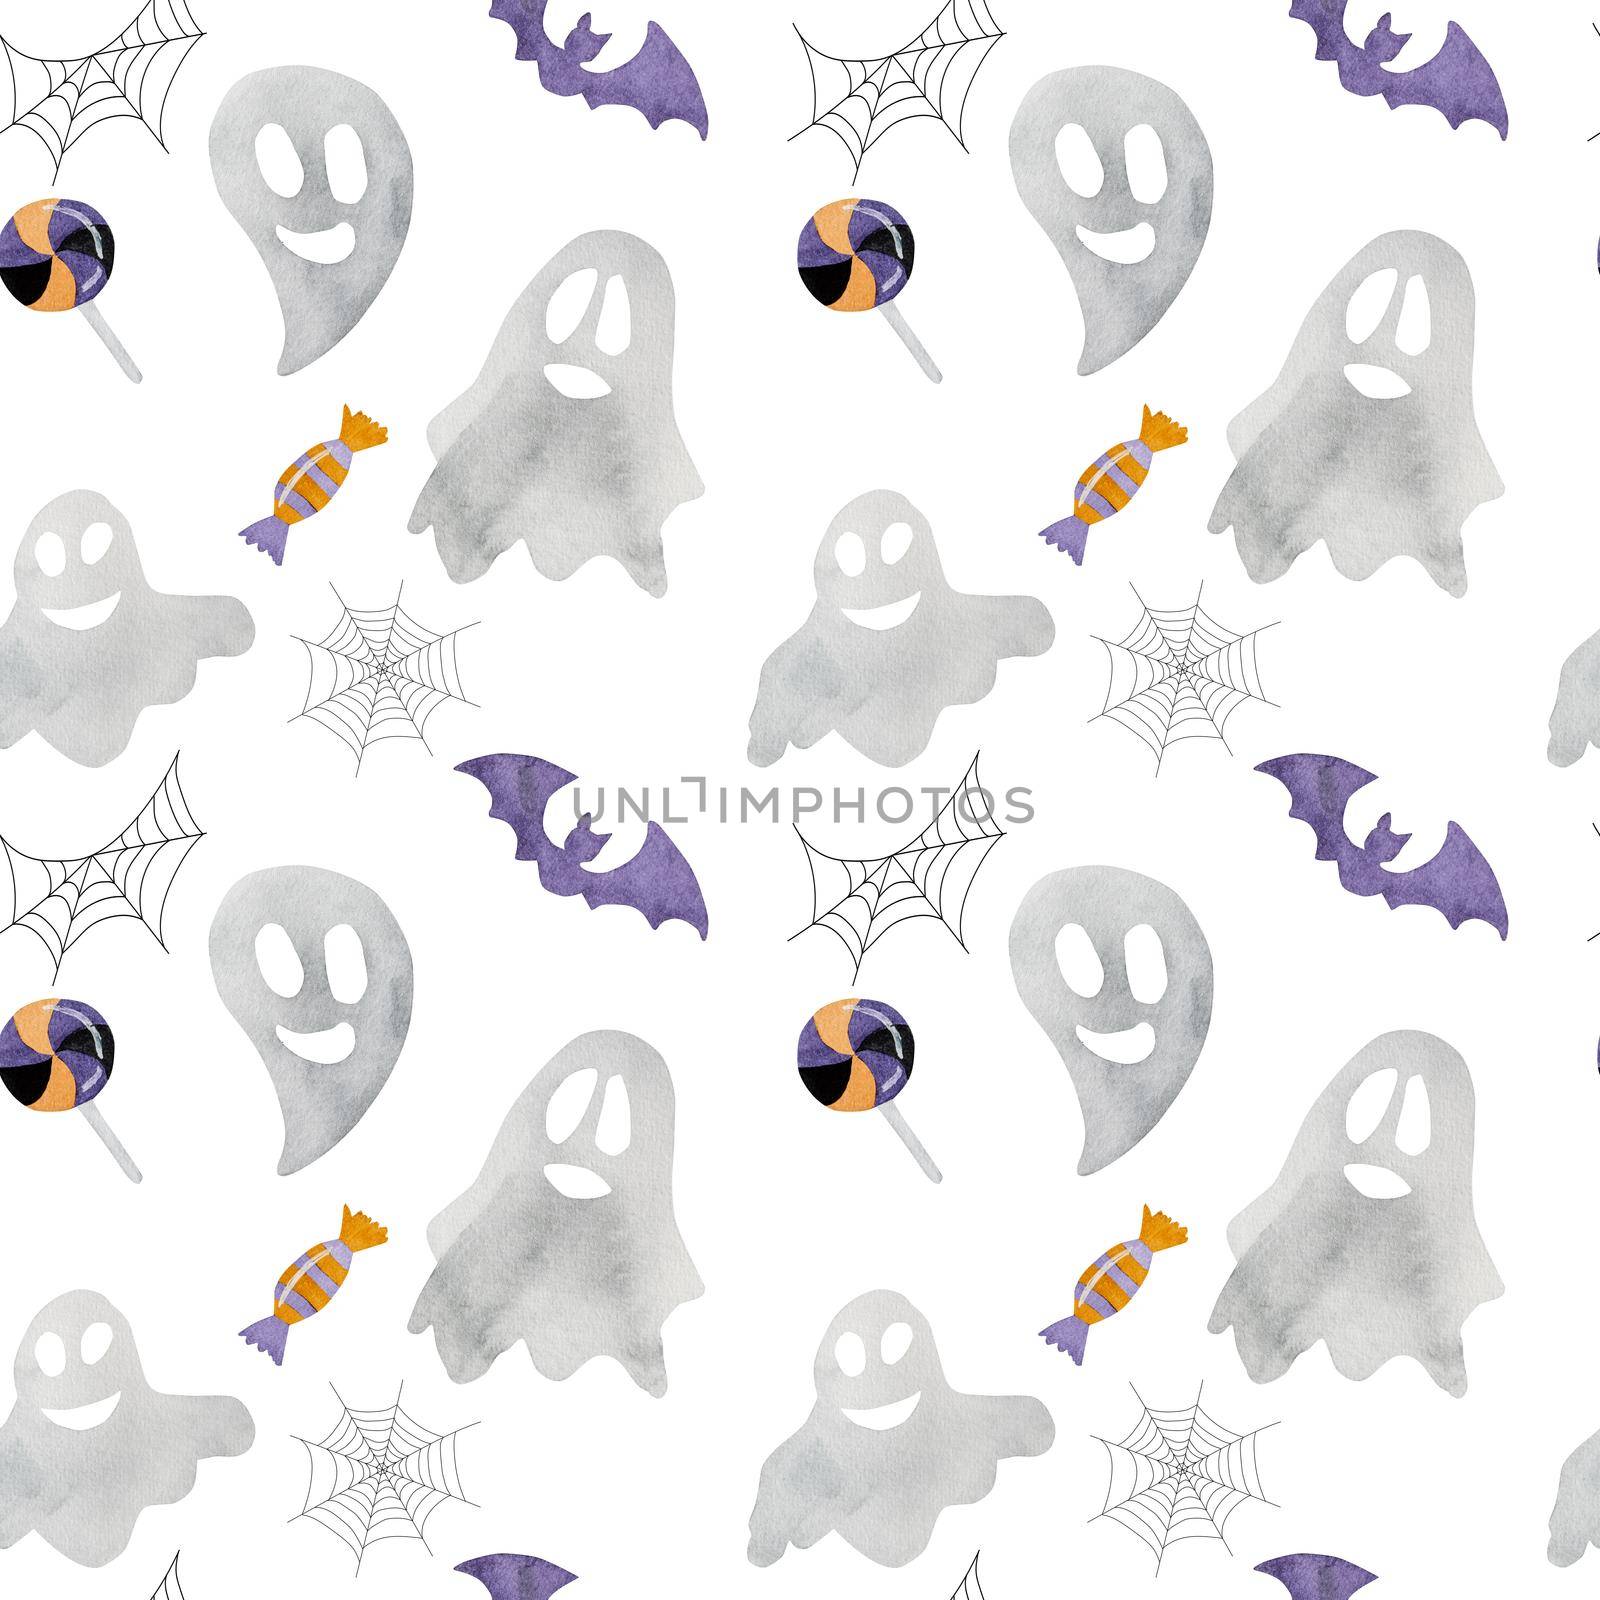 Halloween watercolor seamless pattern wih ghosts and bats on white background. Autumn october scary holiday decoration